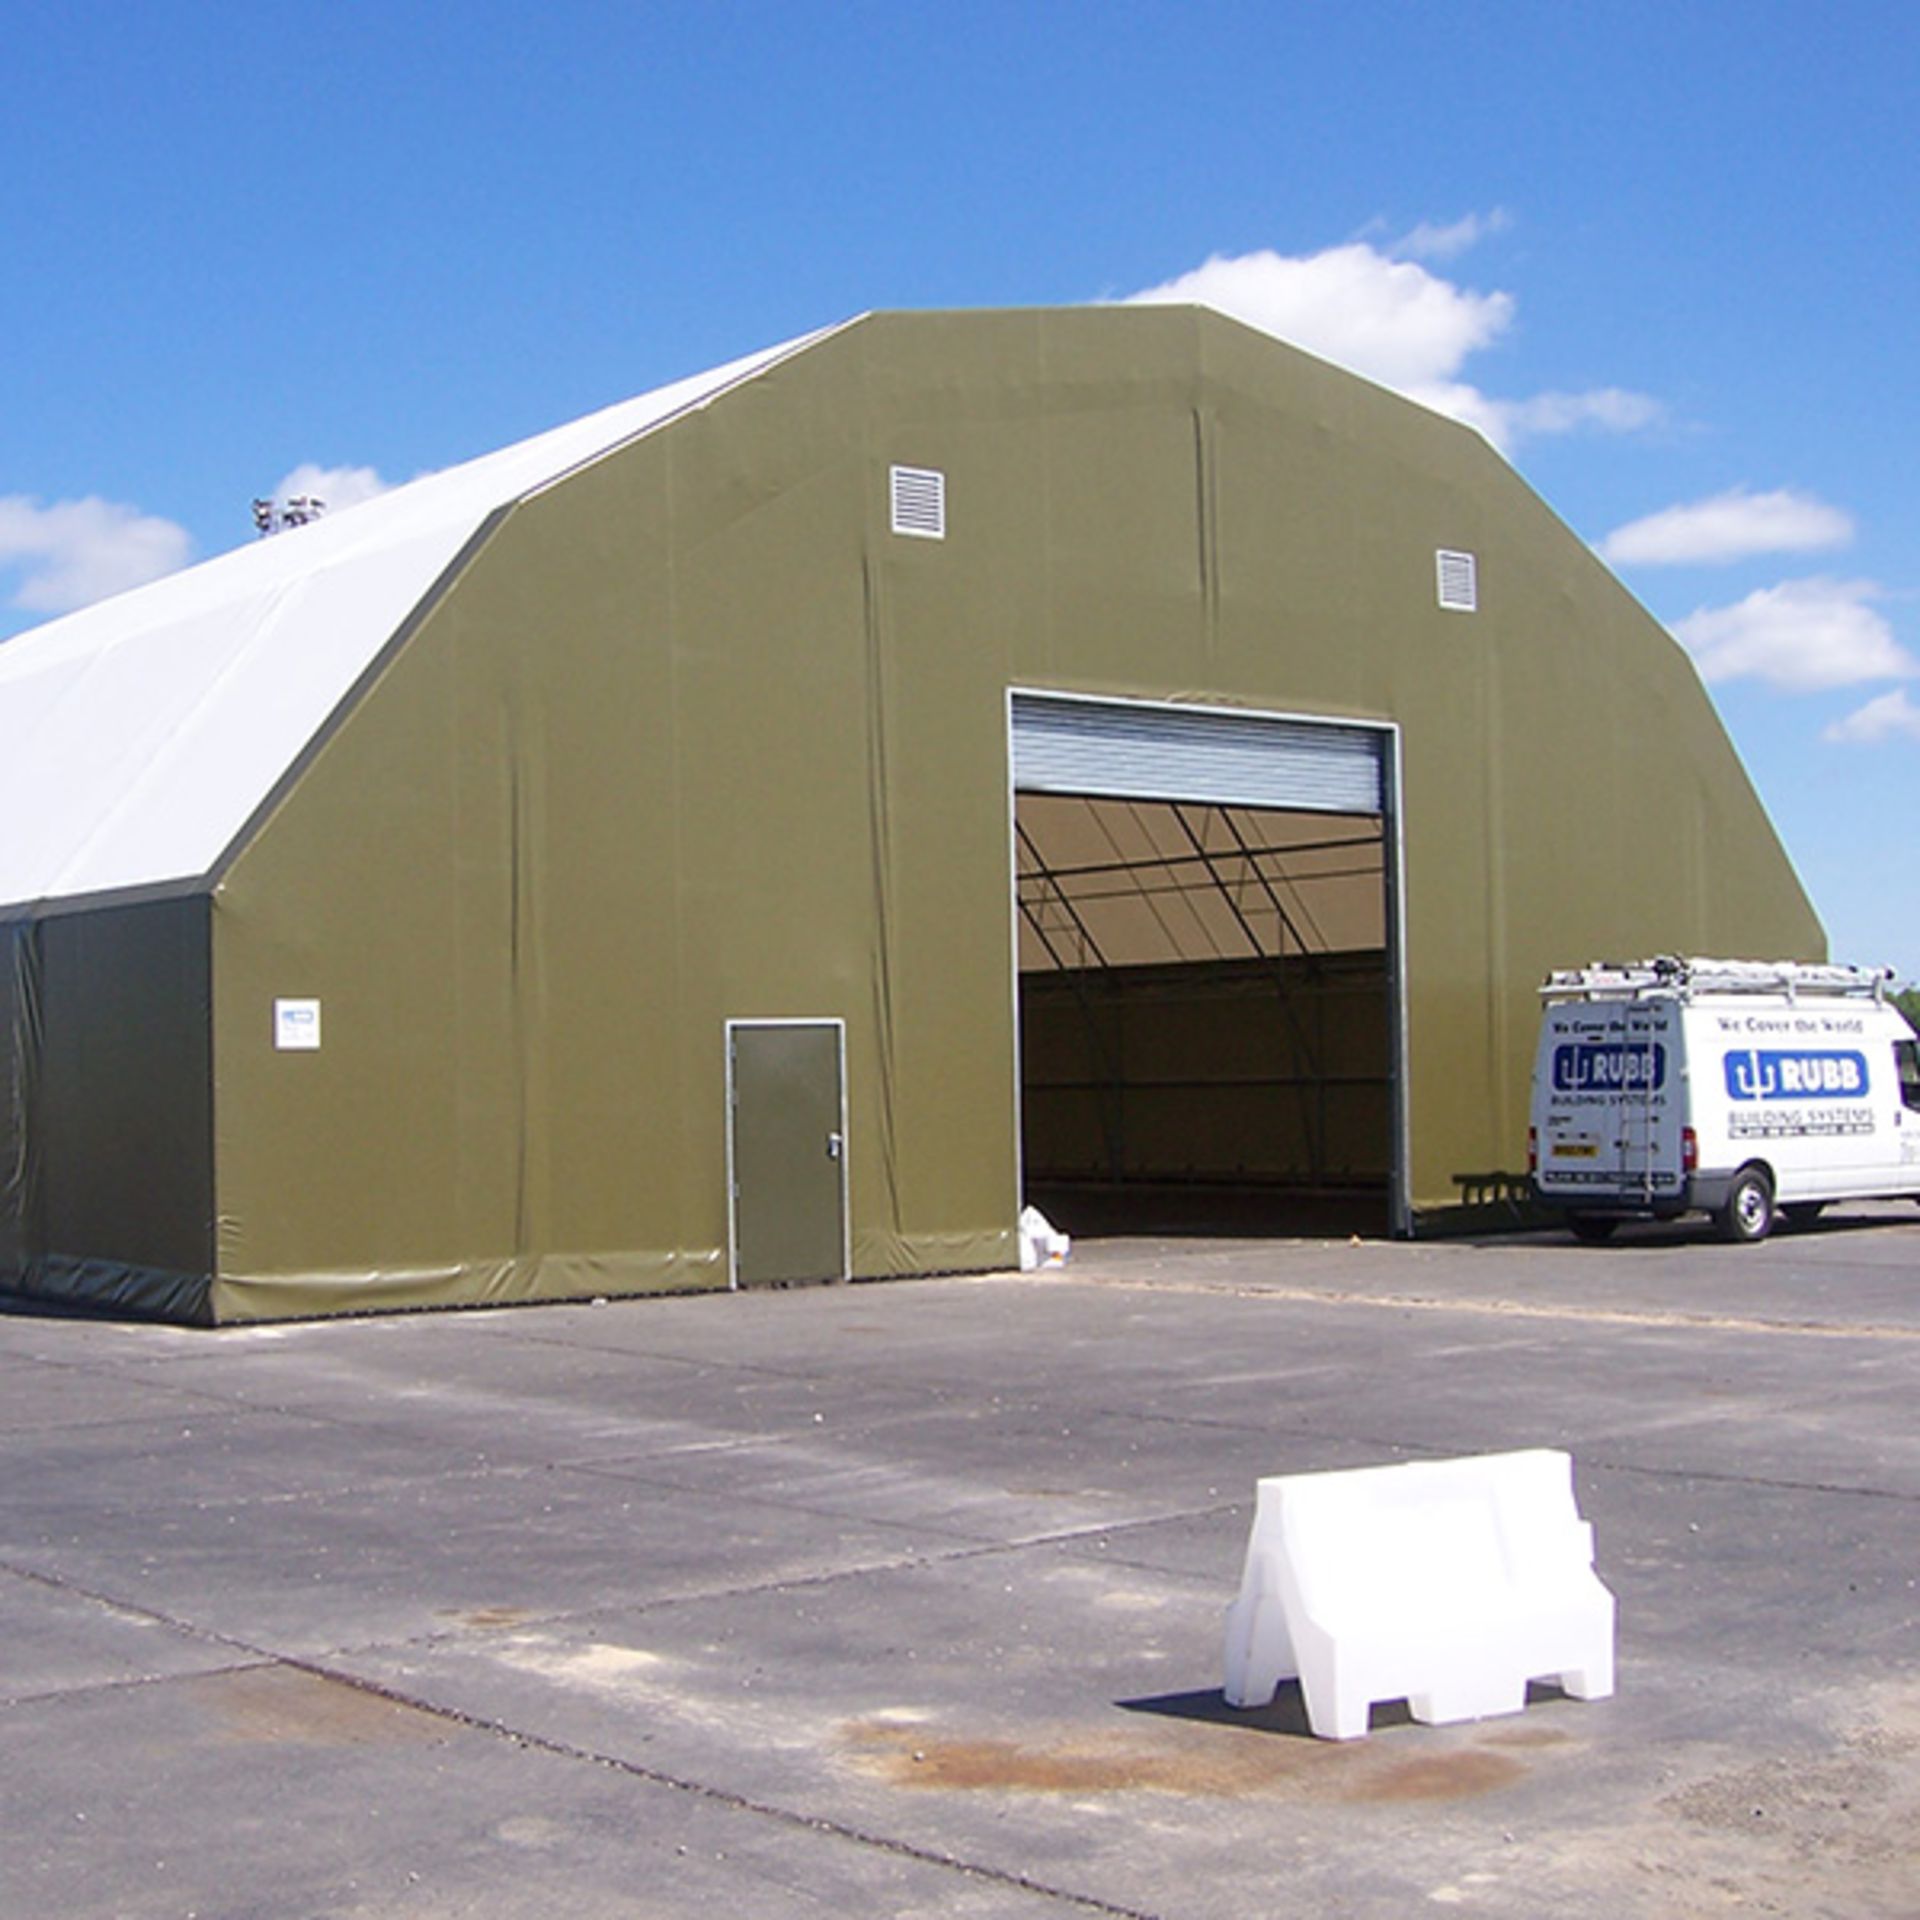 Containerised Rubb Building assembly - 21 x 12 x 3m NV - will require hiab to load due to weight